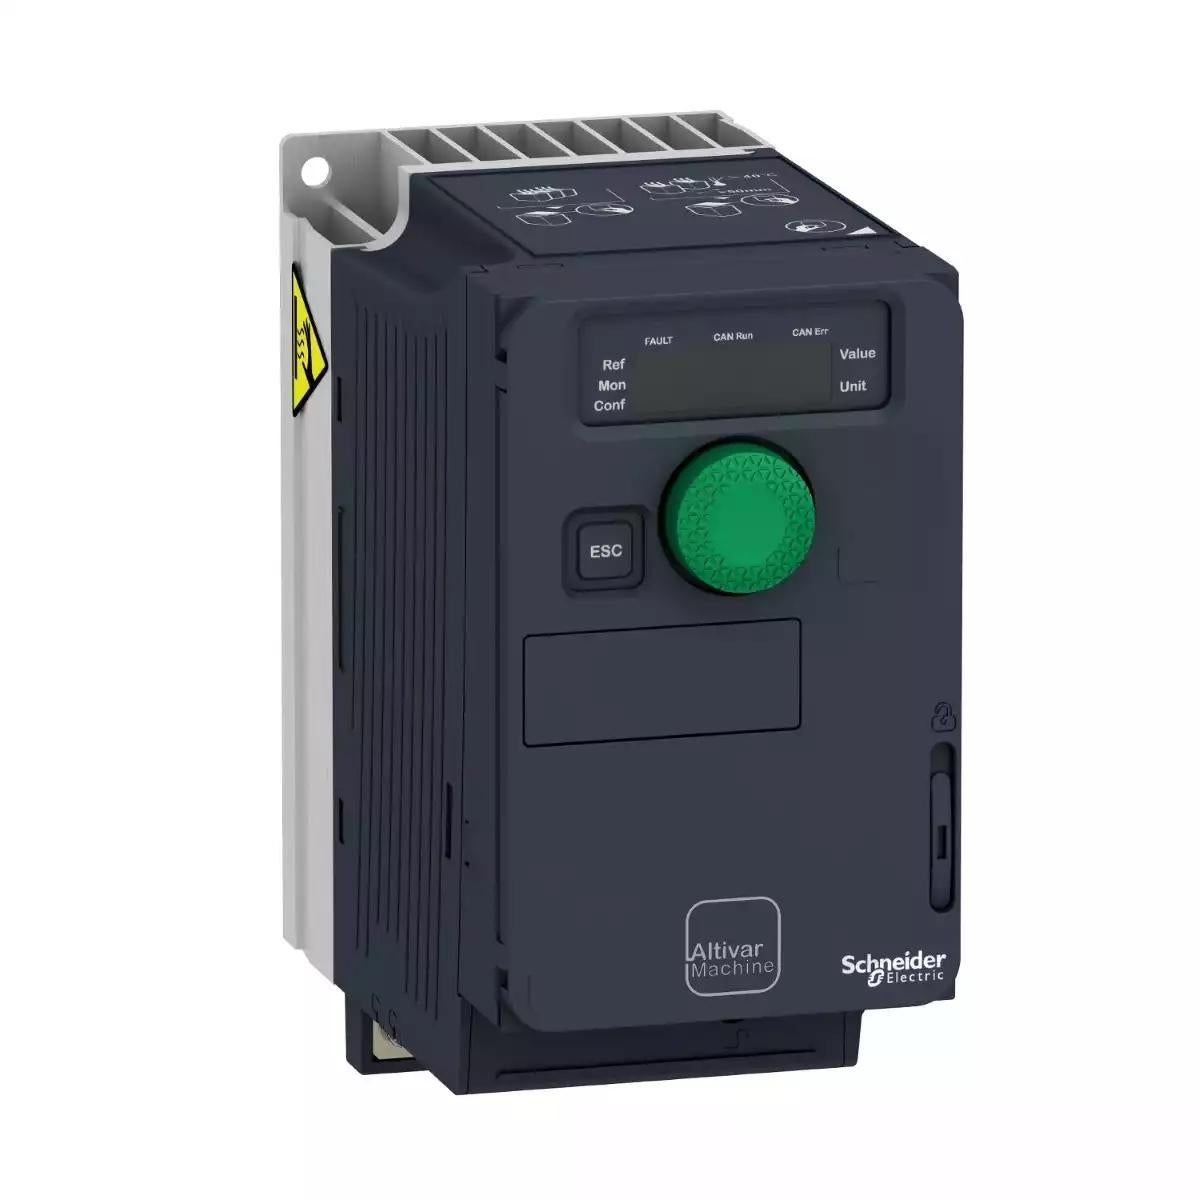 variable speed drive, Altivar Machine ATV320, 0.18kW, 200 to 240V, 3 phases, compact